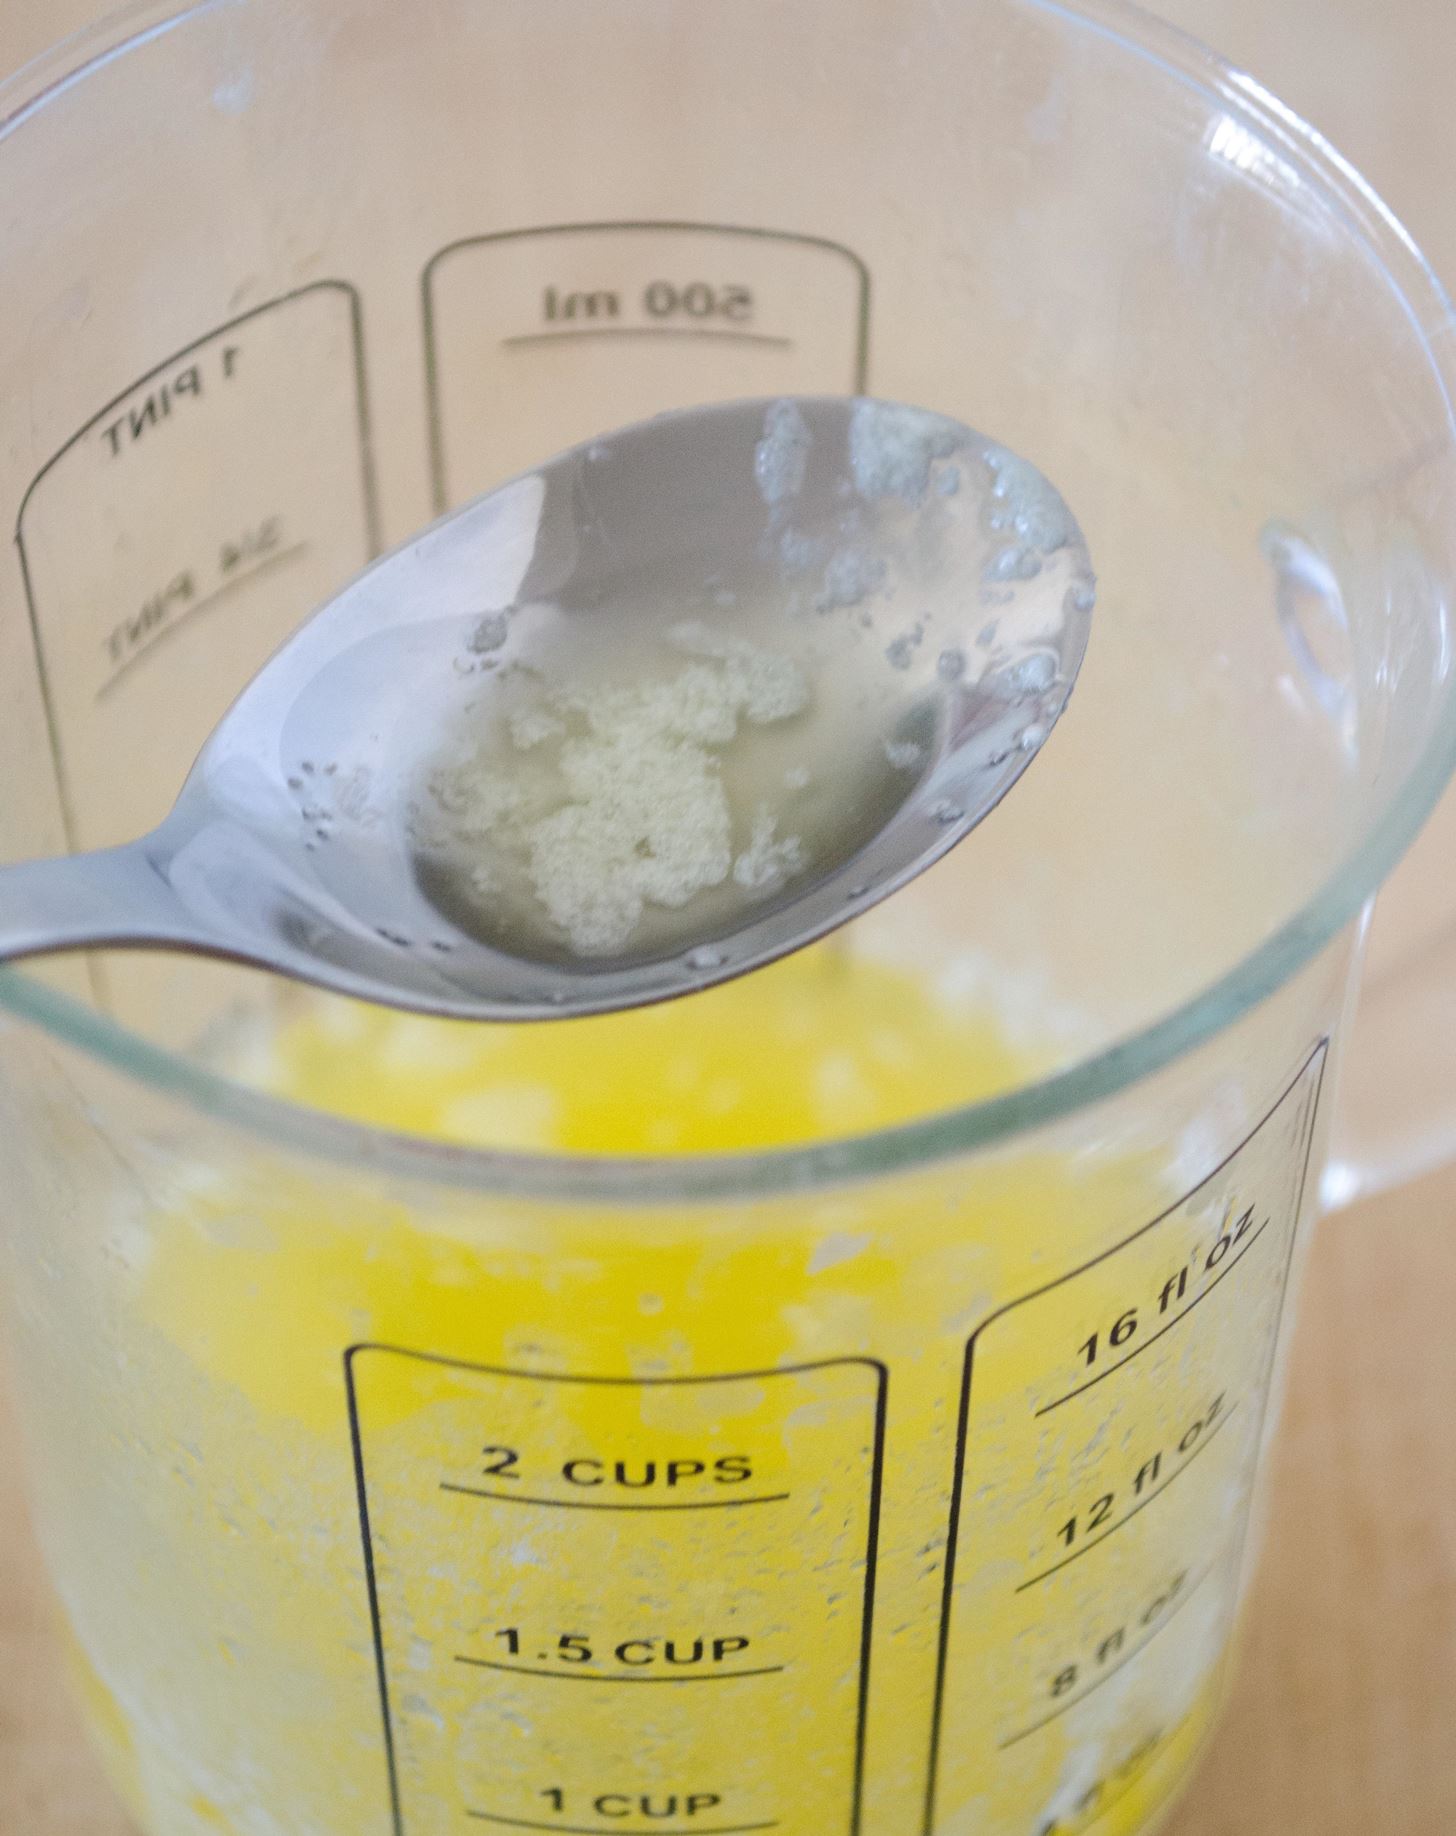 The Absolute Best Way to Clarify Butter... Period